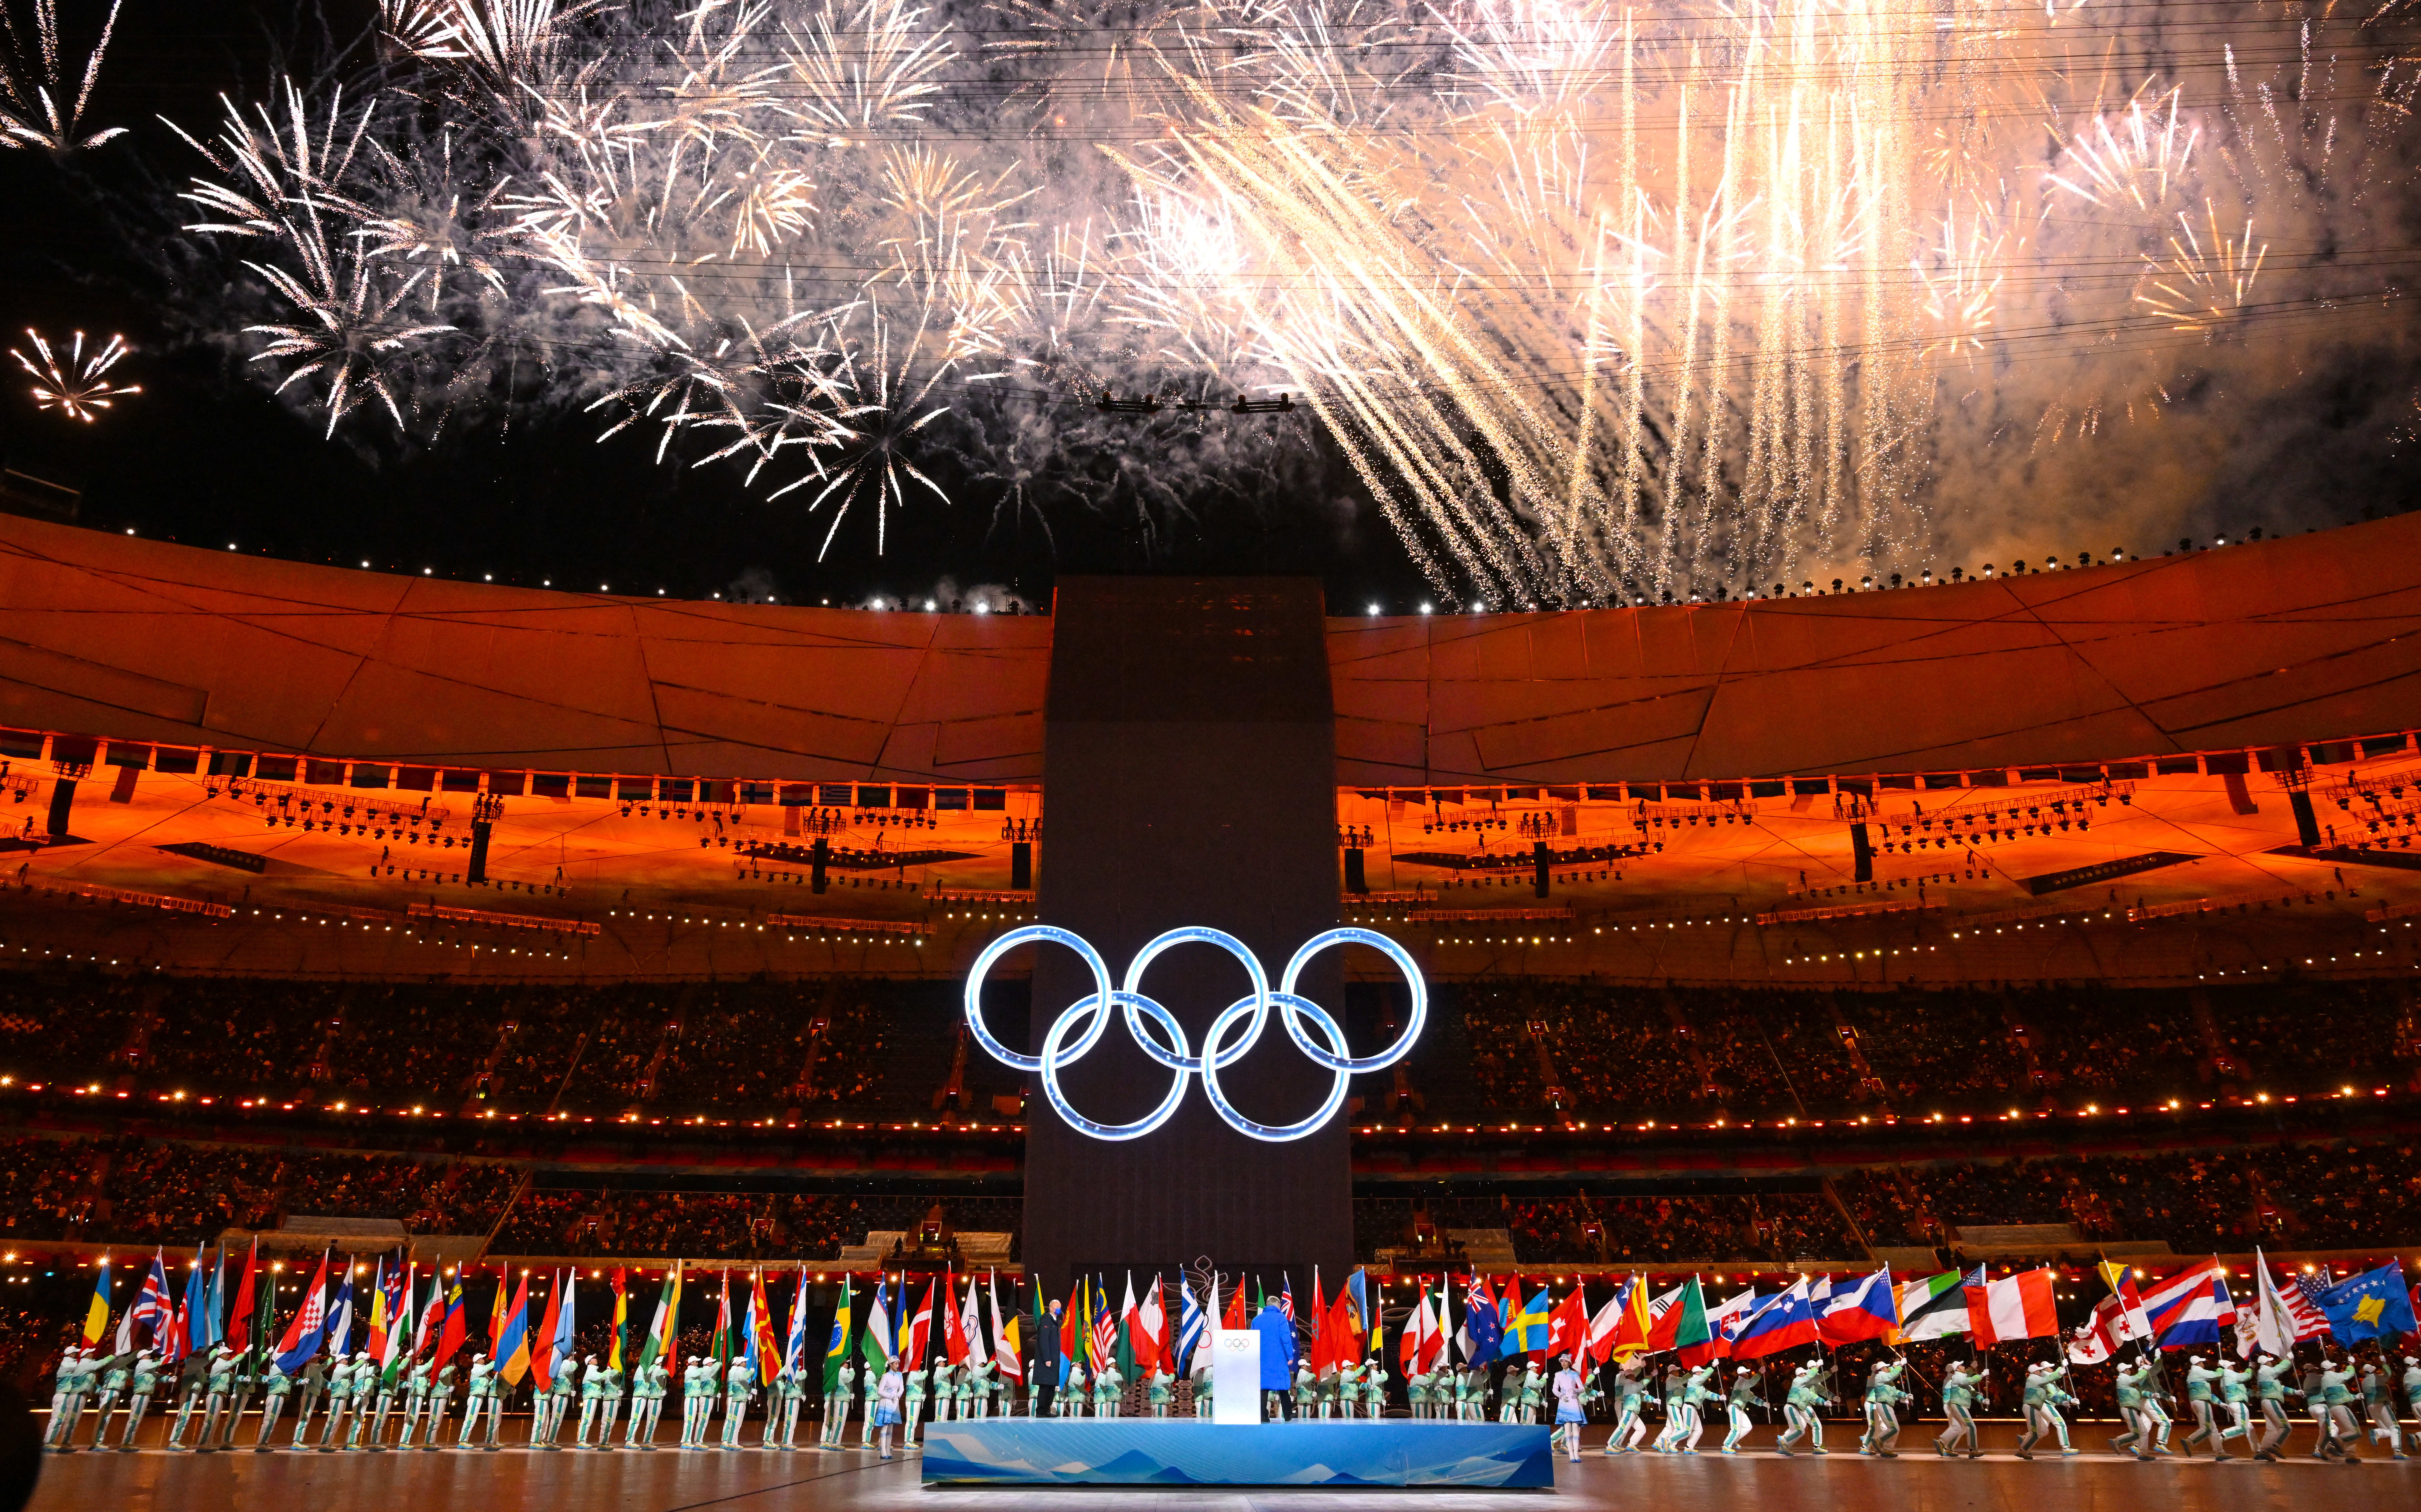 Fireworks explode over the Olympic rings during the opening ceremony of the Beijing 2022 Winter Olympic Games, at the National Stadium, known as the Bird's Nest, in Beijing, on February 4, 2022.